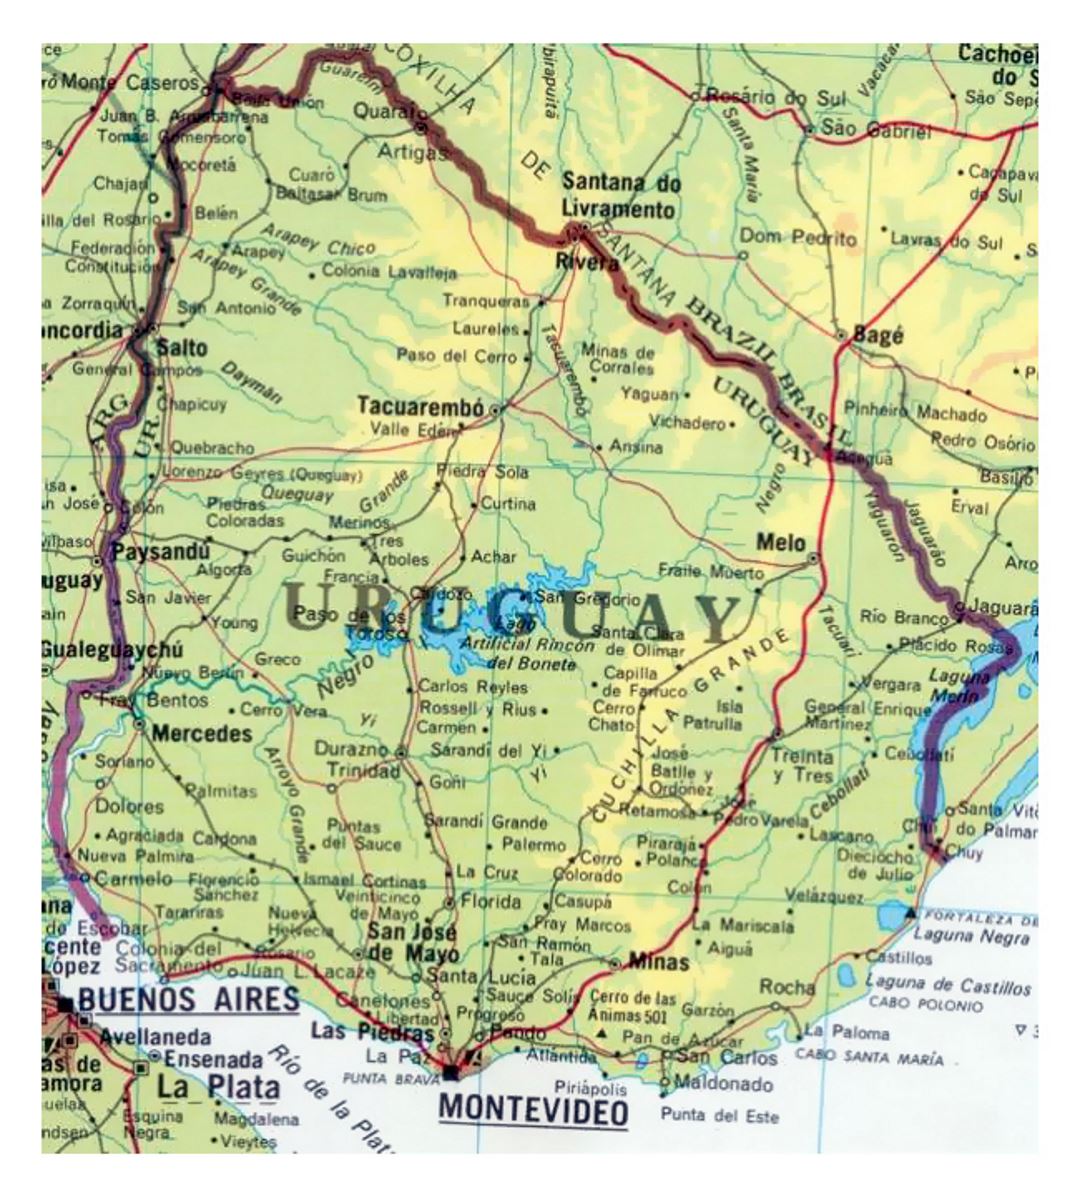 Detailed map of Uruguay with roads and cities